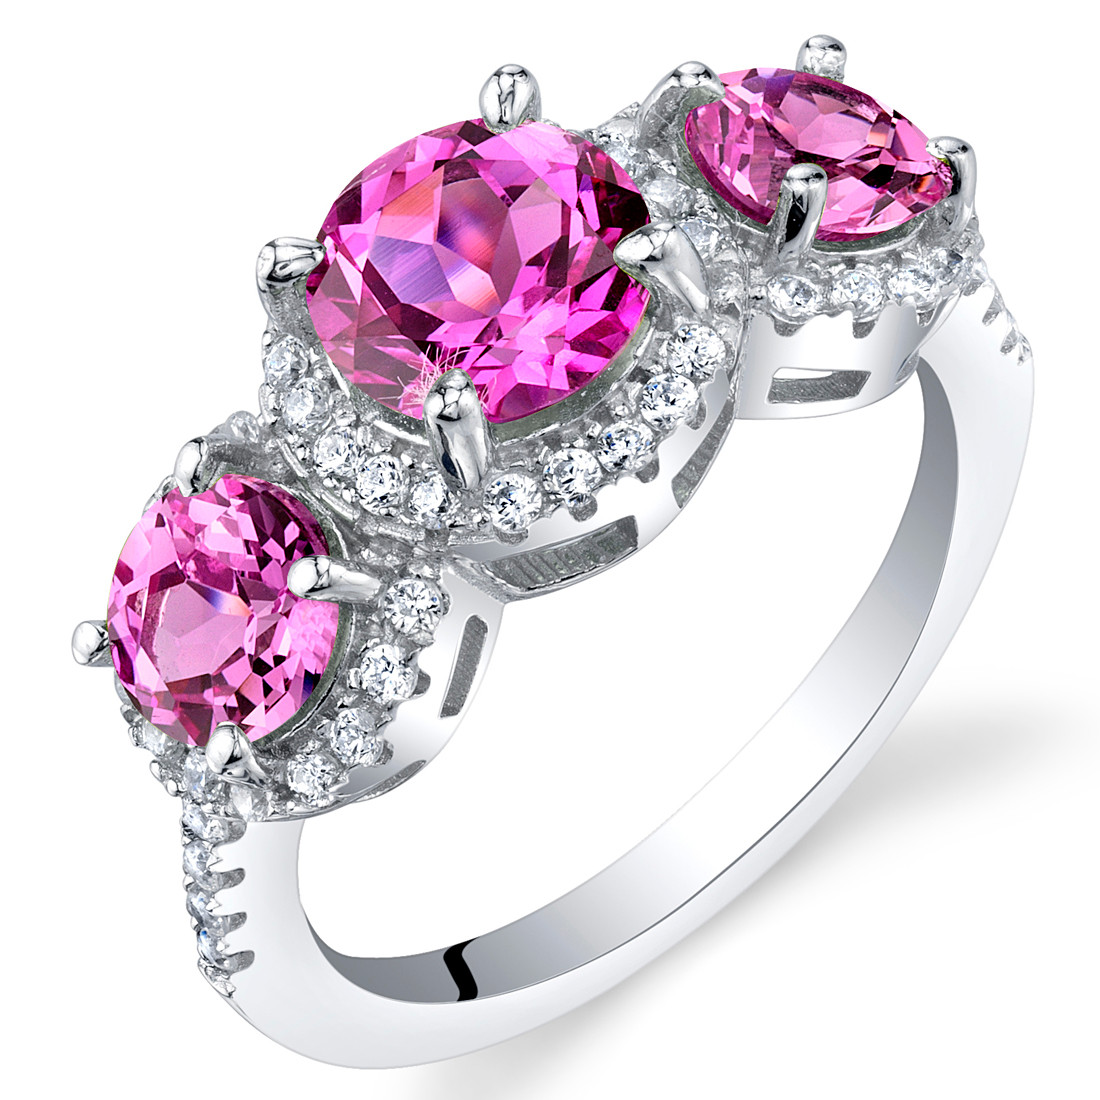 Created Pink Sapphire Sterling Silver 3 Stone Halo Ring Sizes 5 to 9